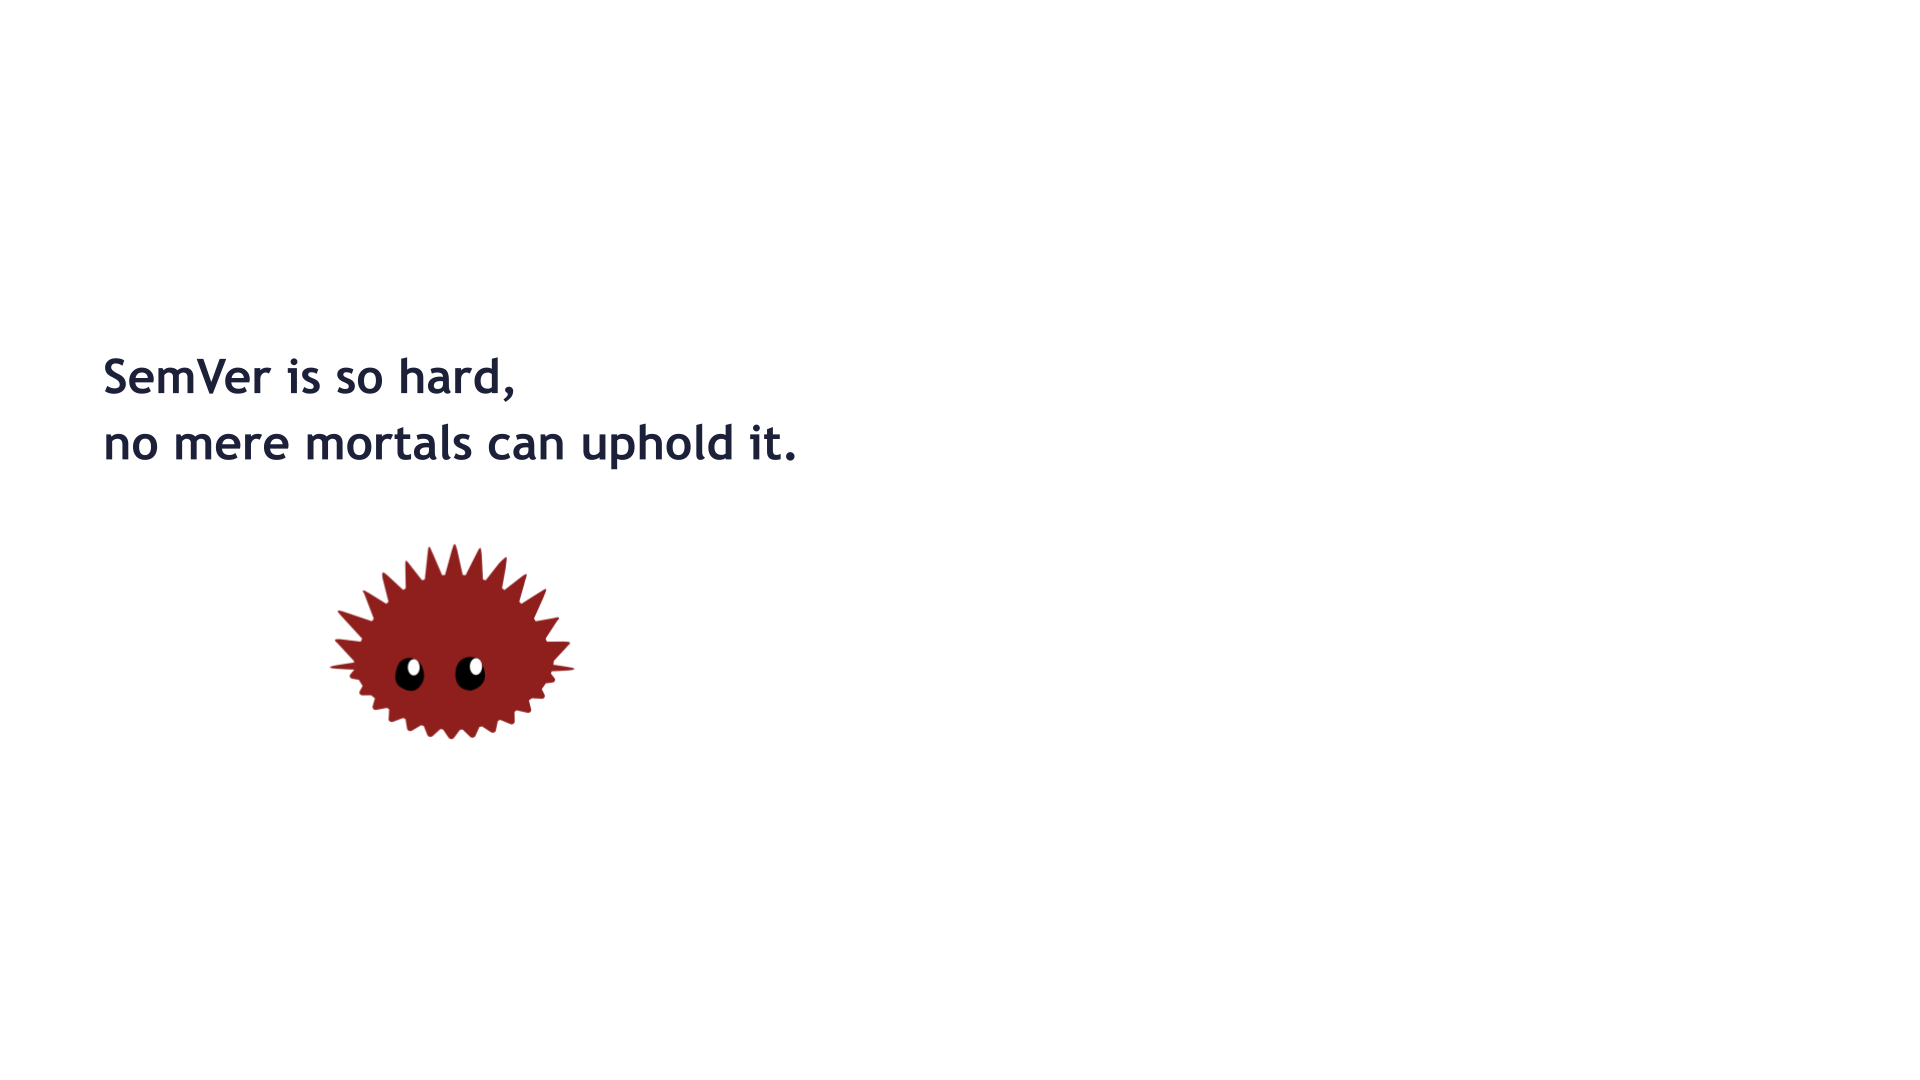 "SemVer is so hard, no mere mortals can uphold it." above an image of the Rust urchin looking spiky and dangerous.